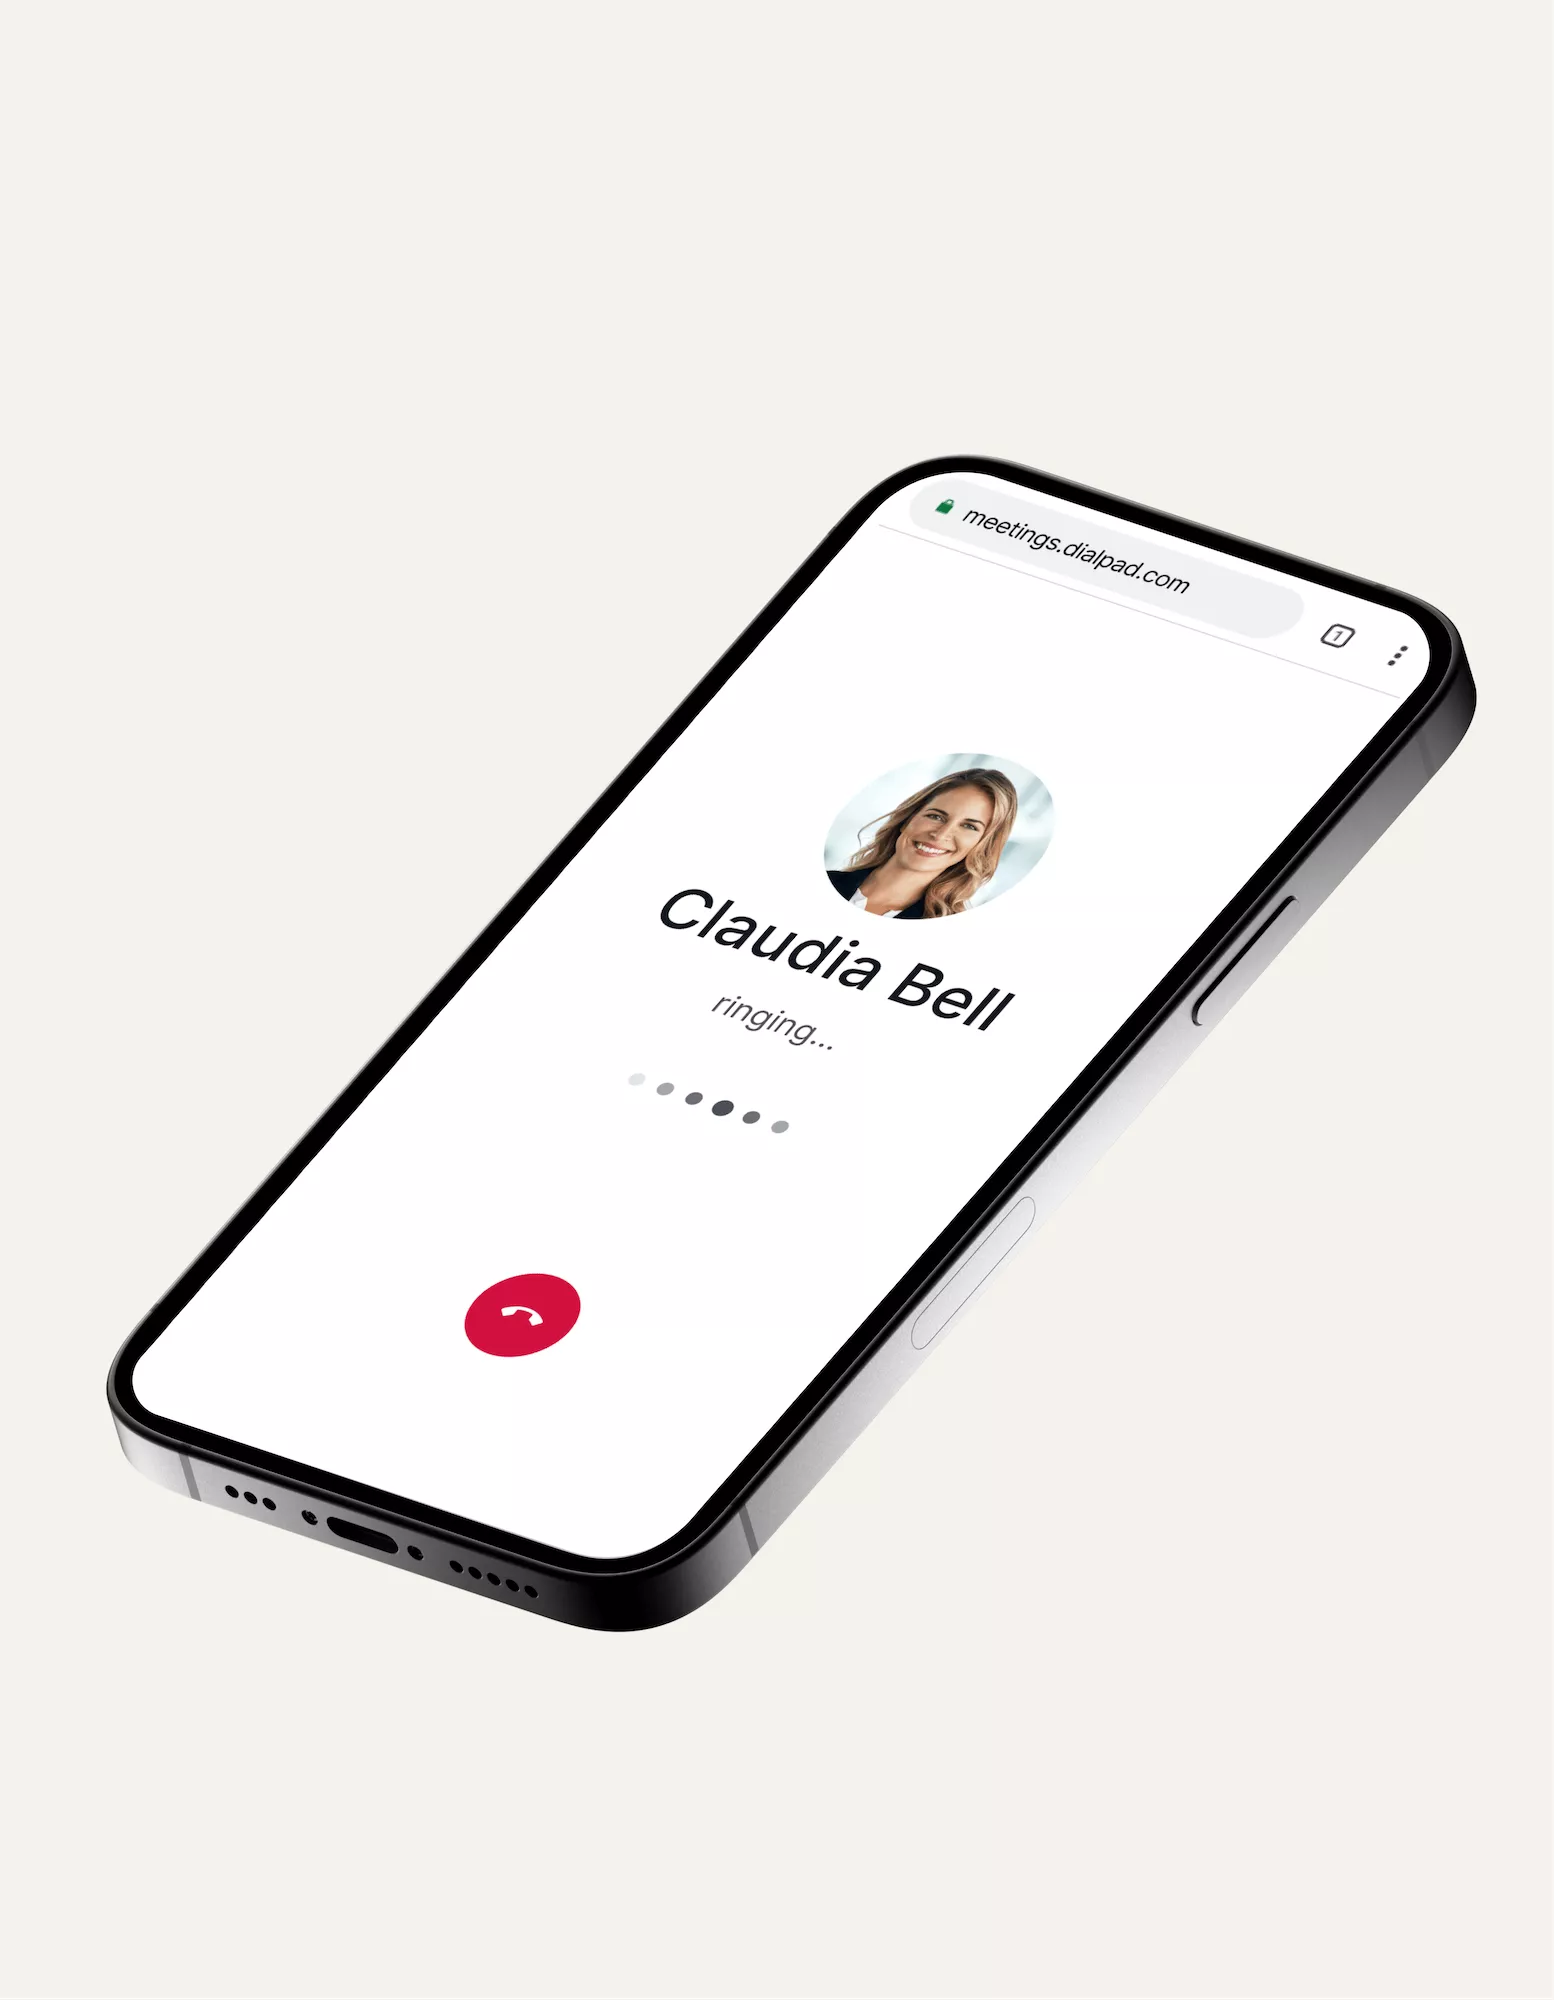 A phone call being received from Dialpad's softphone app